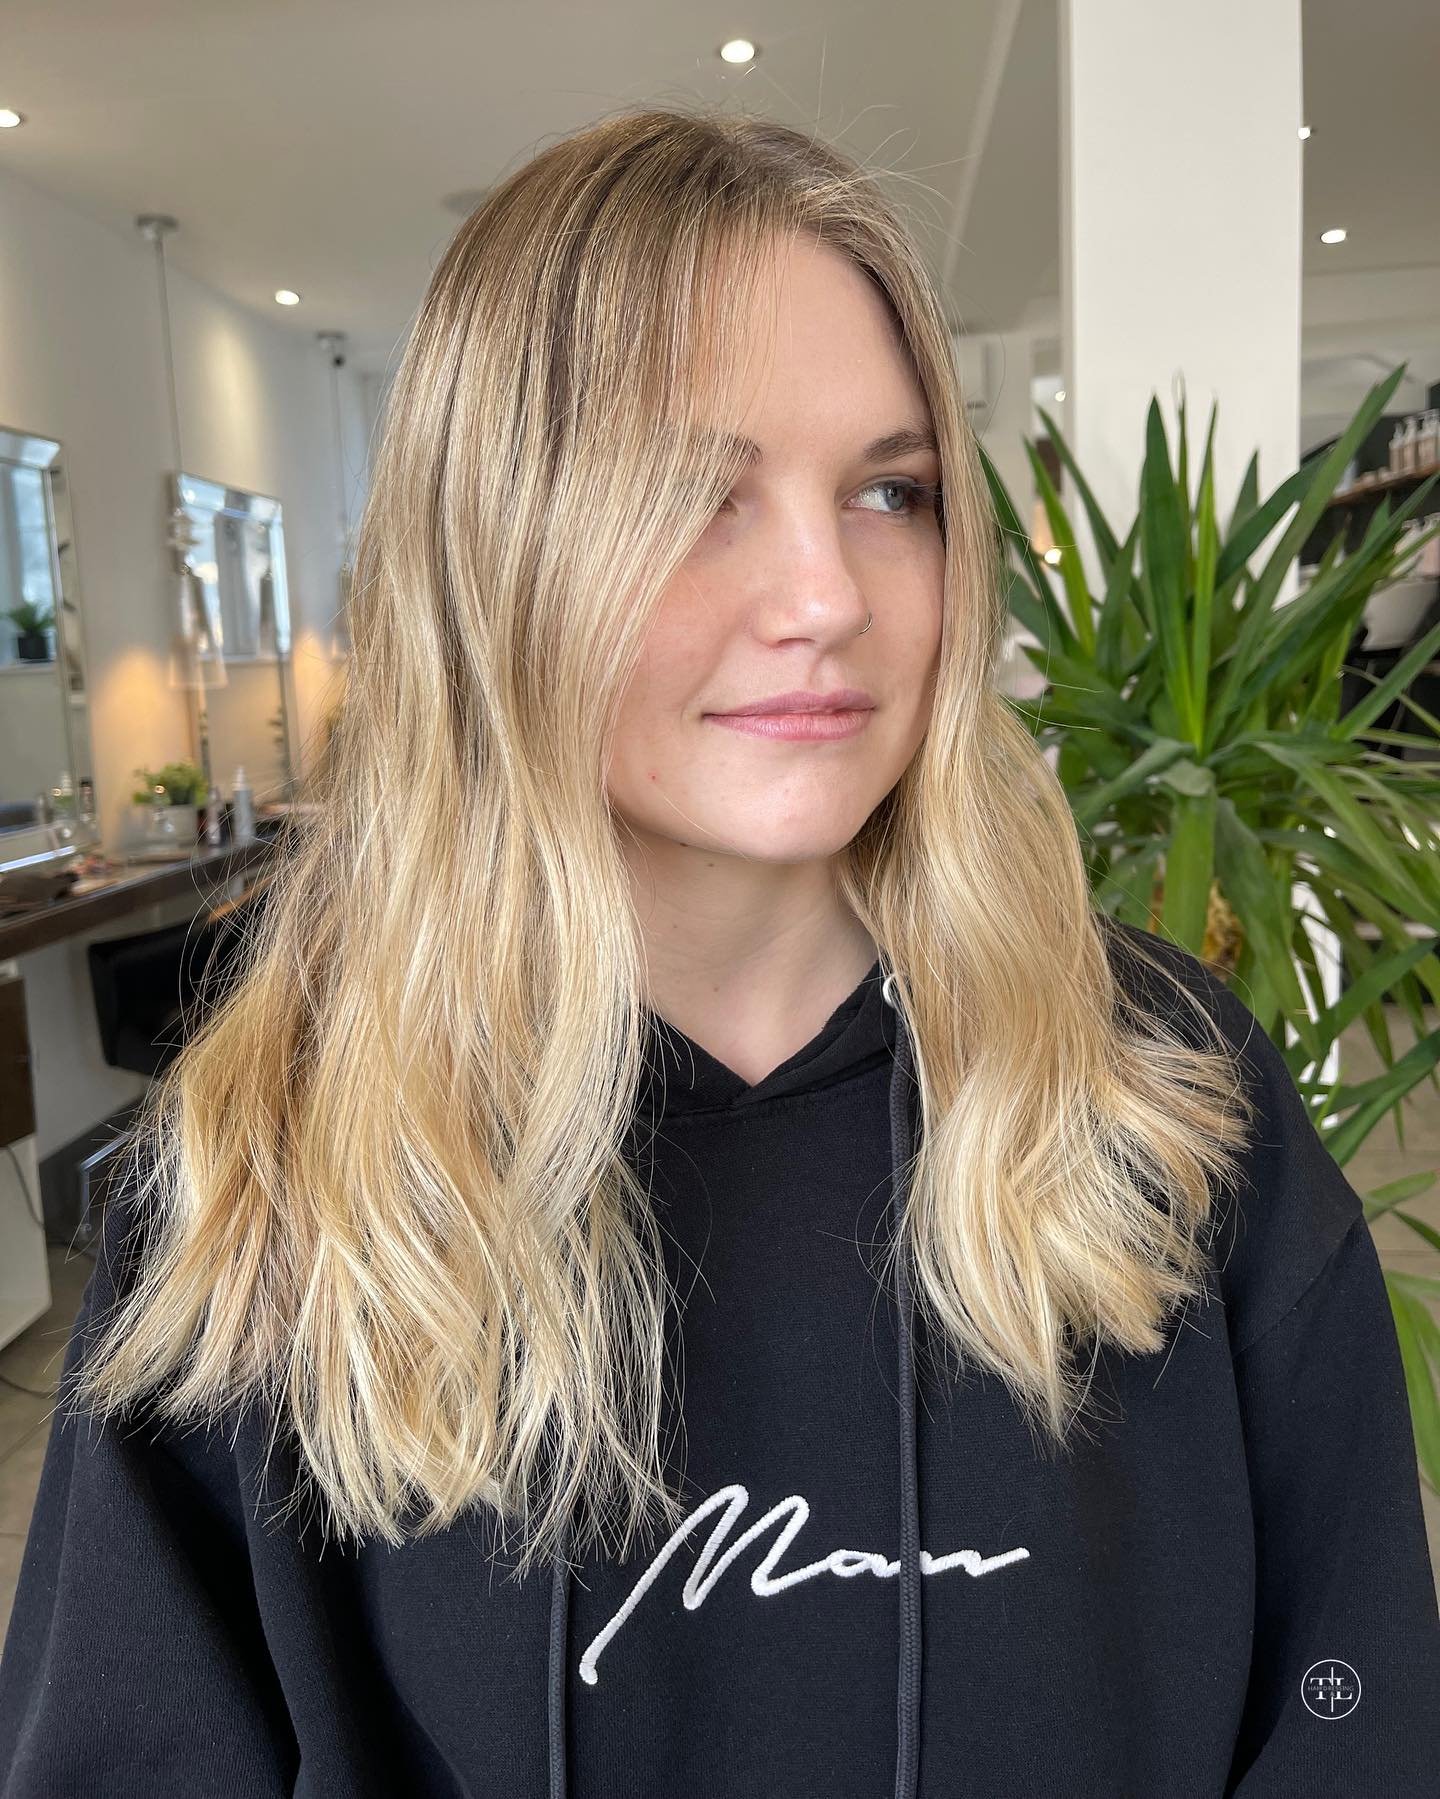 Save this buttery blonder for your summer hair inspo pic ☀️🌼

Stylist - @hairbyhoneyjane 
Using - @schwarzkopfprouk #blondme &amp; #igoravibrance
Styled with @authenticbeautyconceptuk &amp; @ghdhair